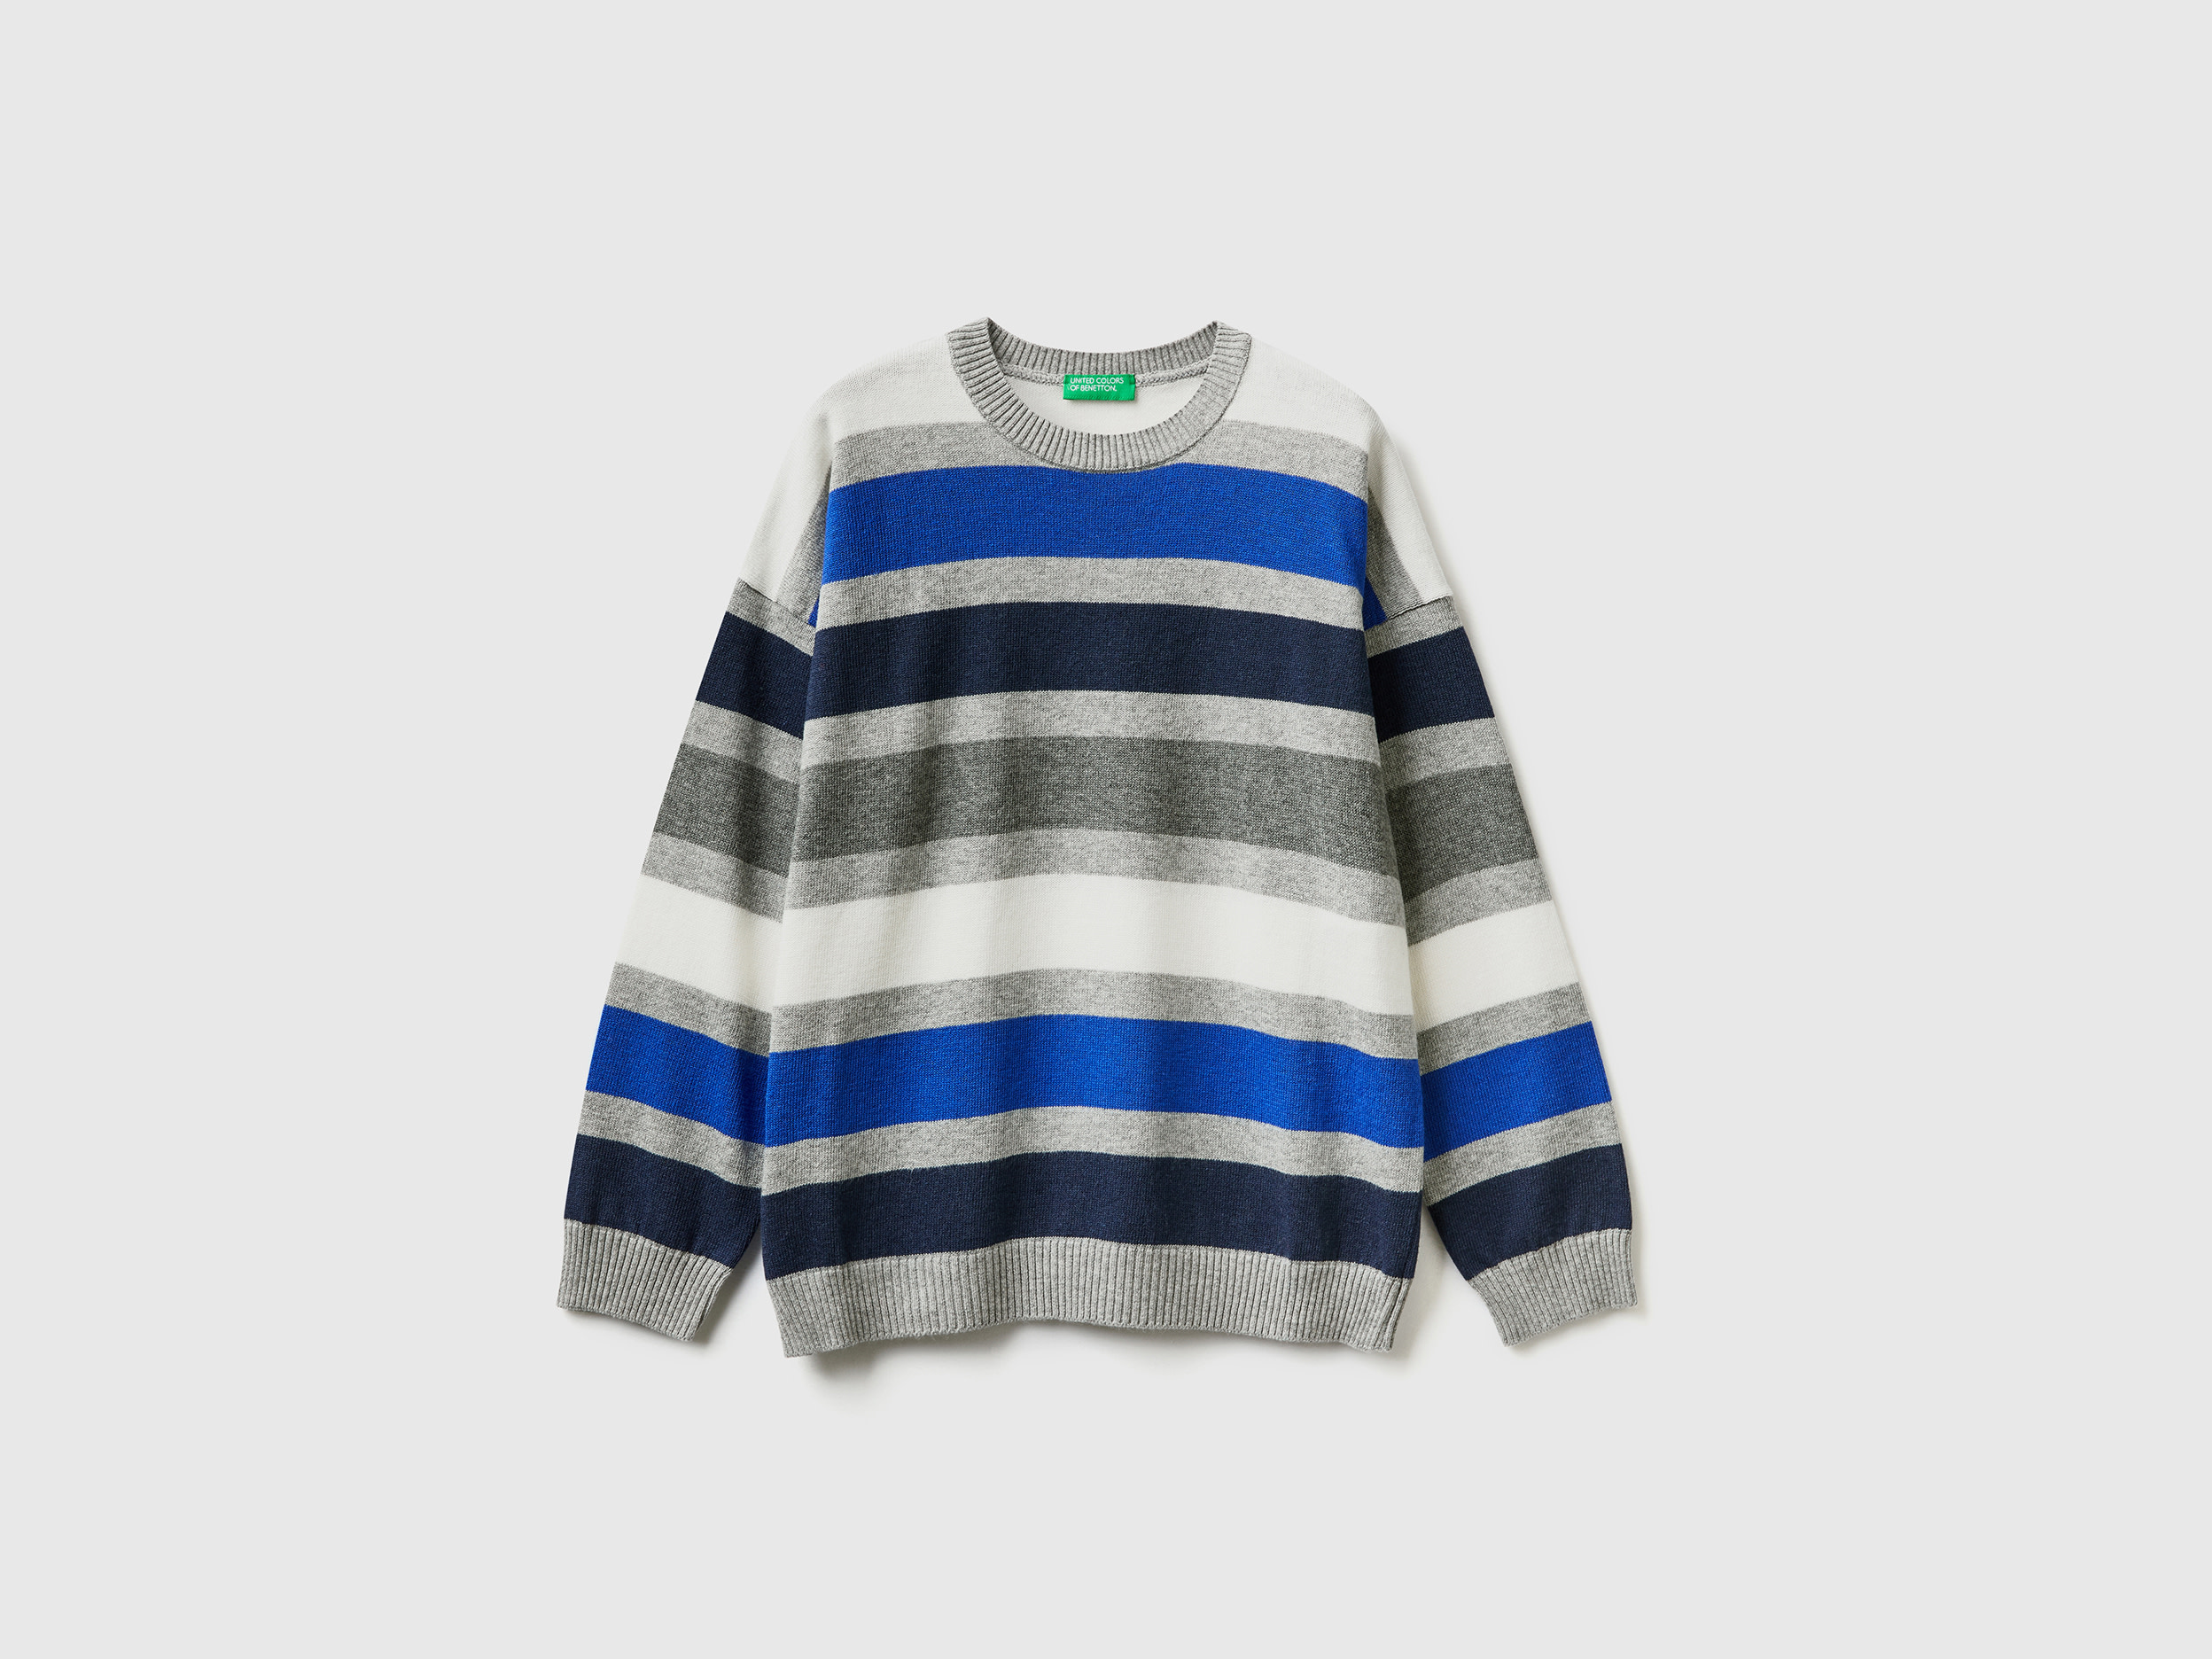 Benetton, Striped Sweater In Wool And Cotton Blend, size XL, Light Gray, Kids